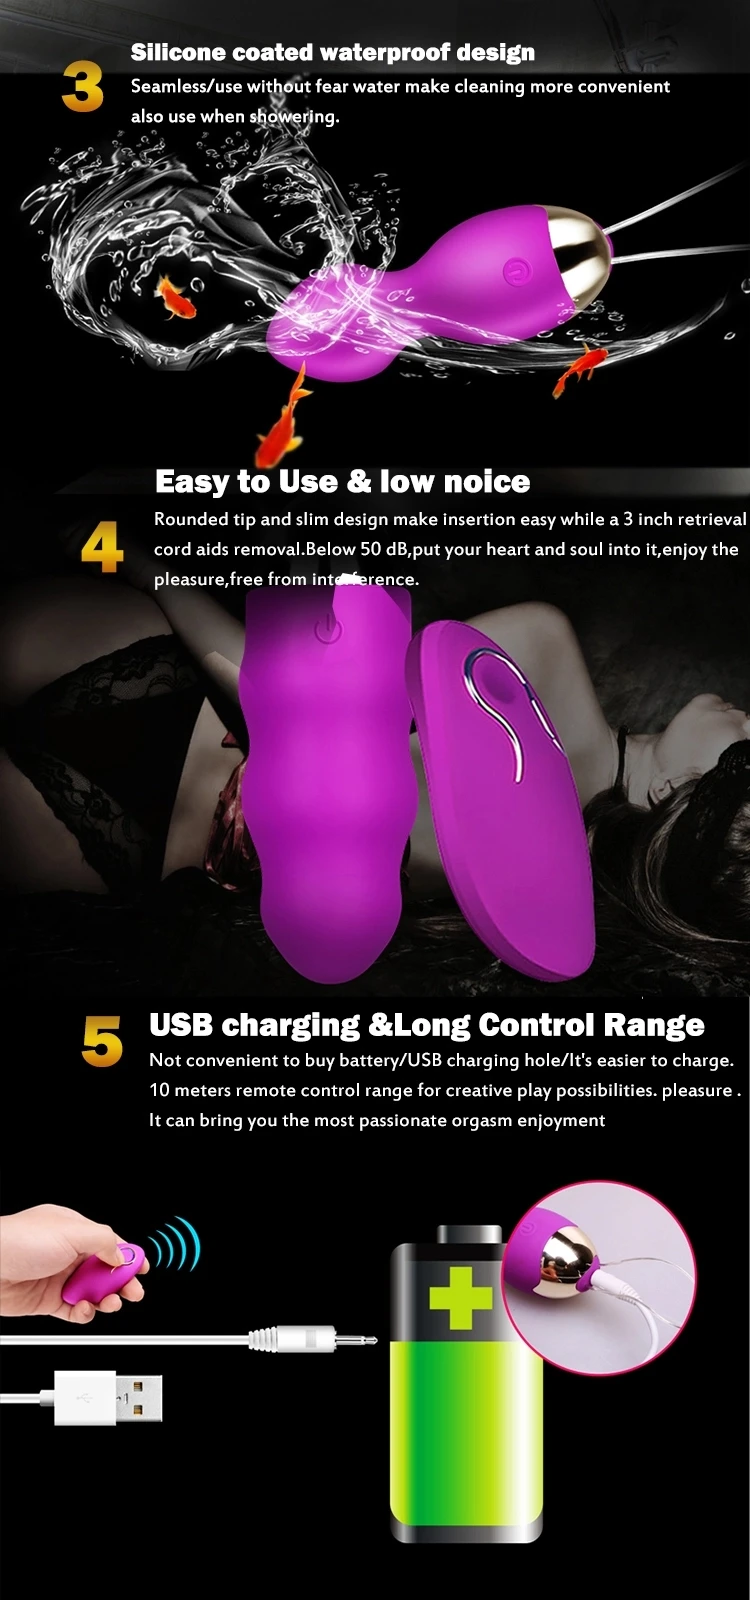 Egg vibrator sex toy, remote control 10 function vibrator, adult sex toy